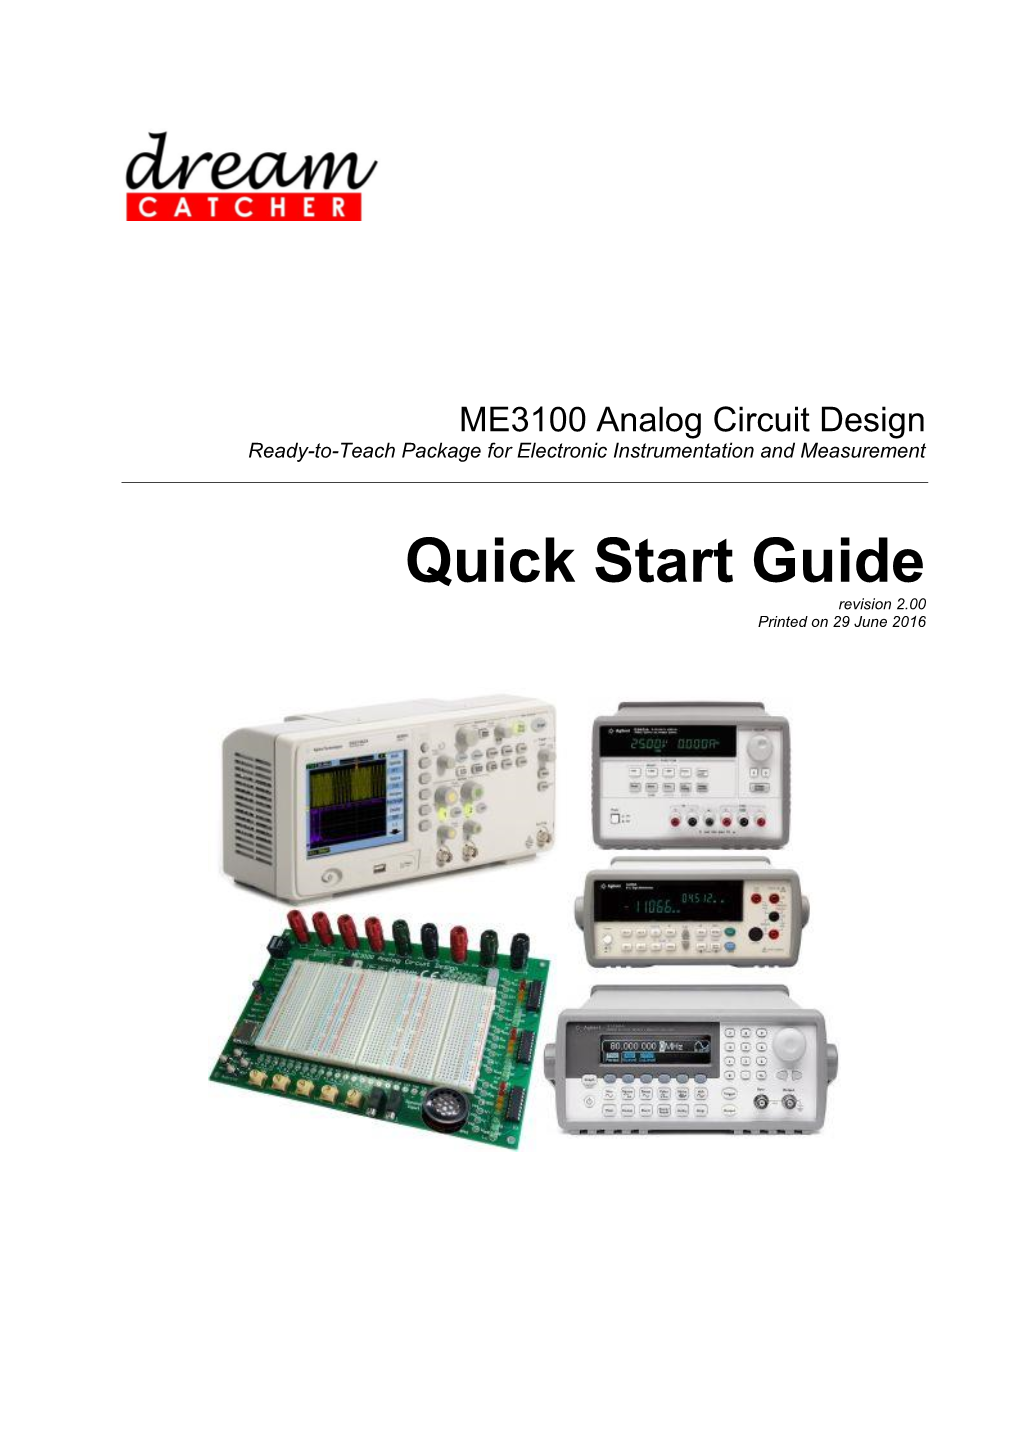 Quick Start Guide Revision 2.00 Printed on 29 June 2016